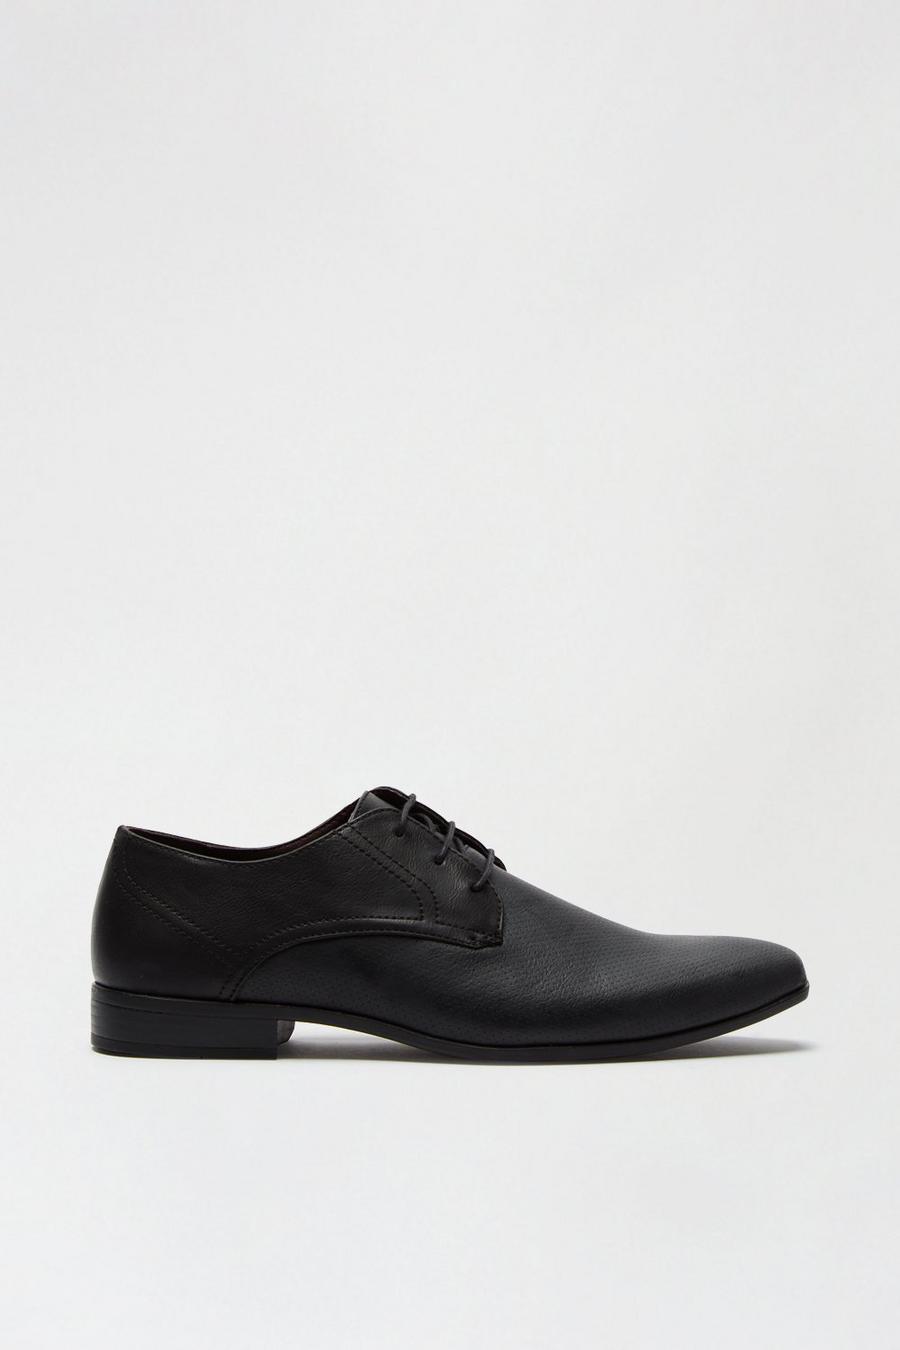 Black Leather Look Formal Derby Shoes